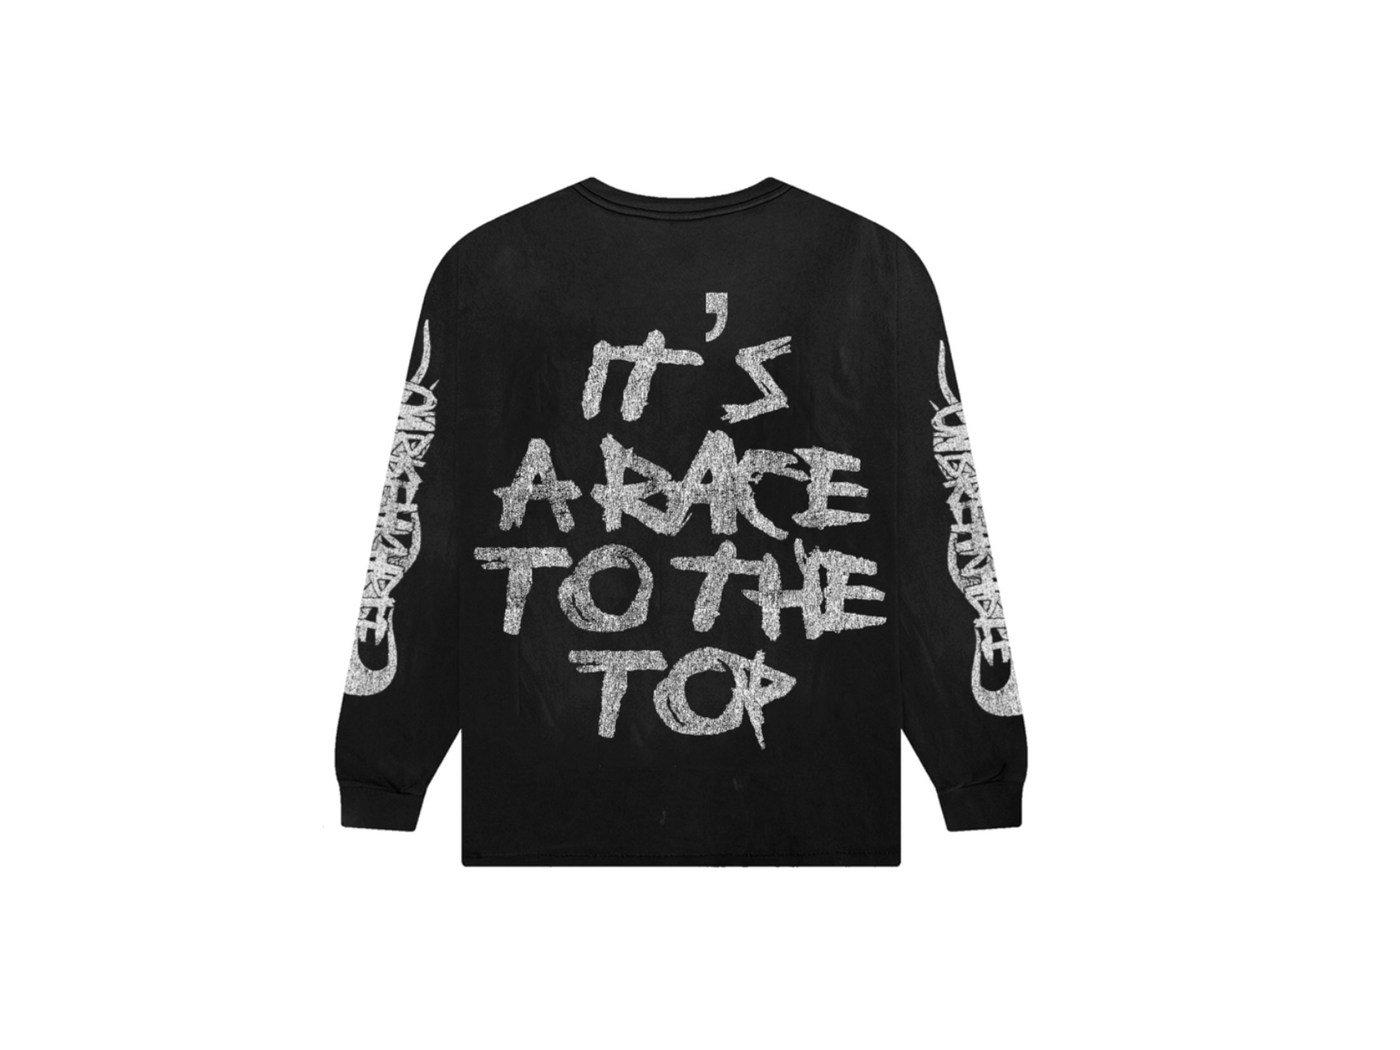 “It’s a Race to the top” Longsleeve